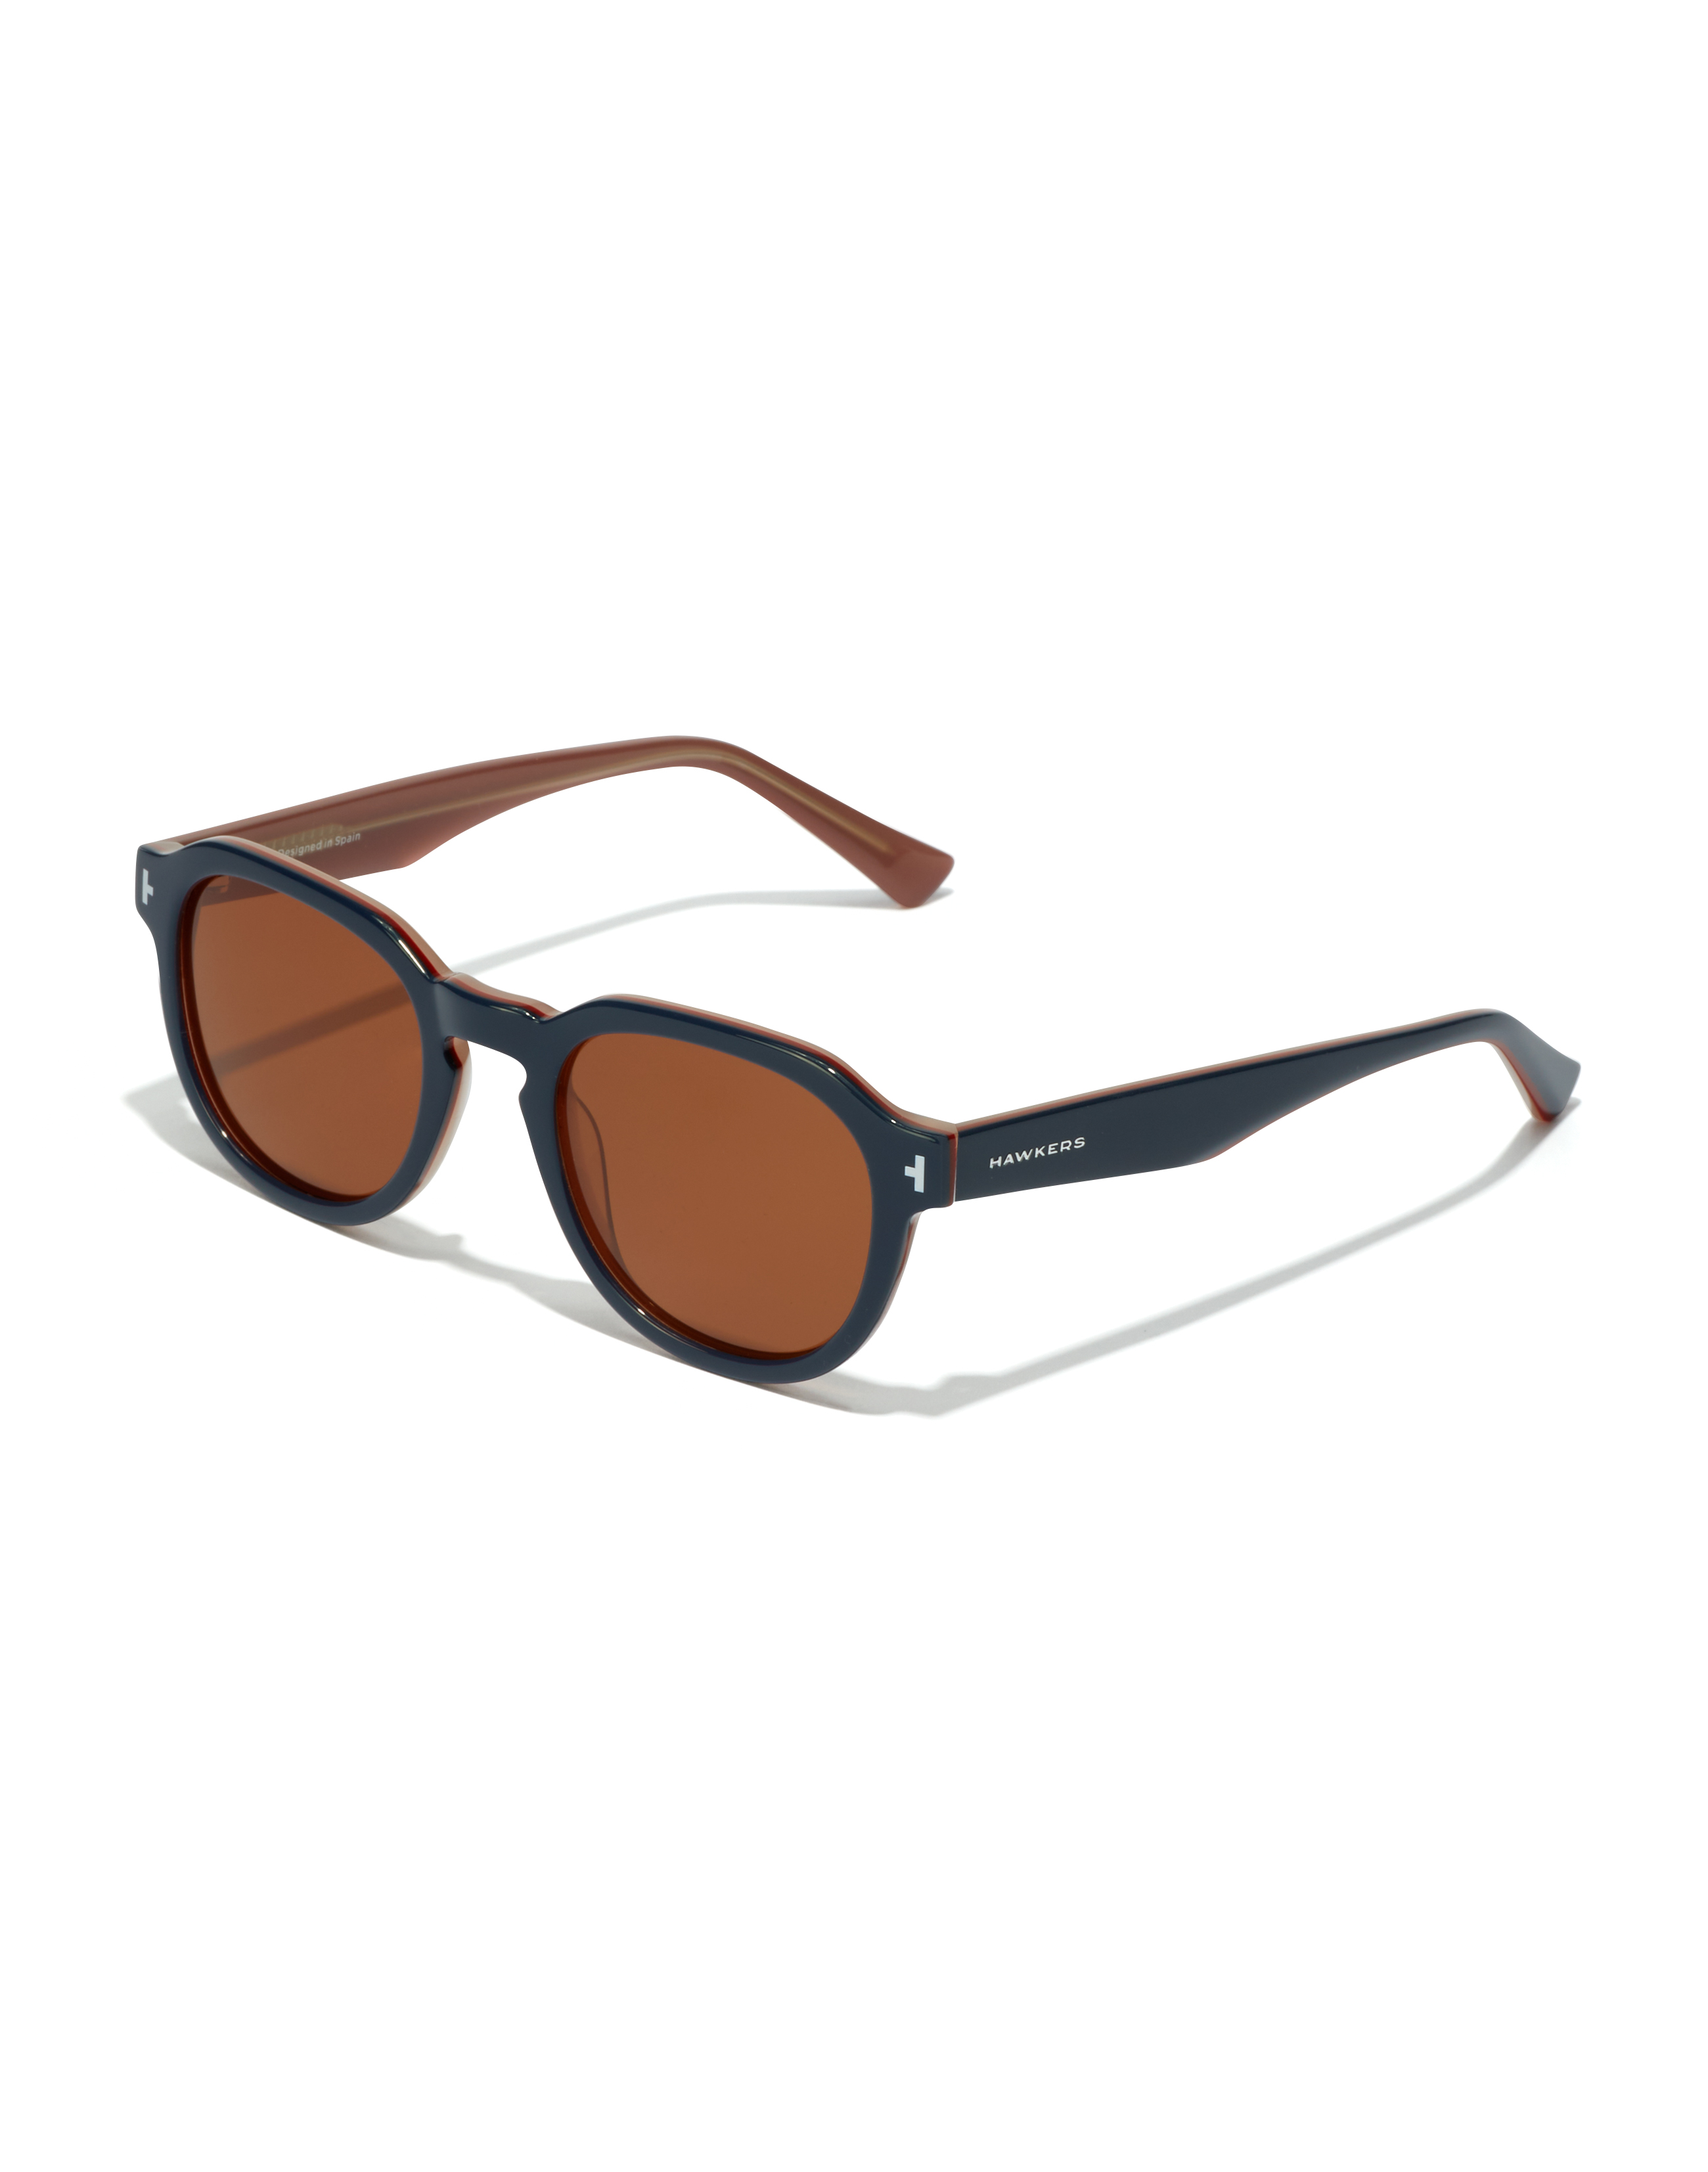 Hawkers HAWKERS POLARIZED Blue Brown WARWICK PAIR Sunglasses for Men and Women, Unisex. UV400 Protection. Official Product designed in Spain